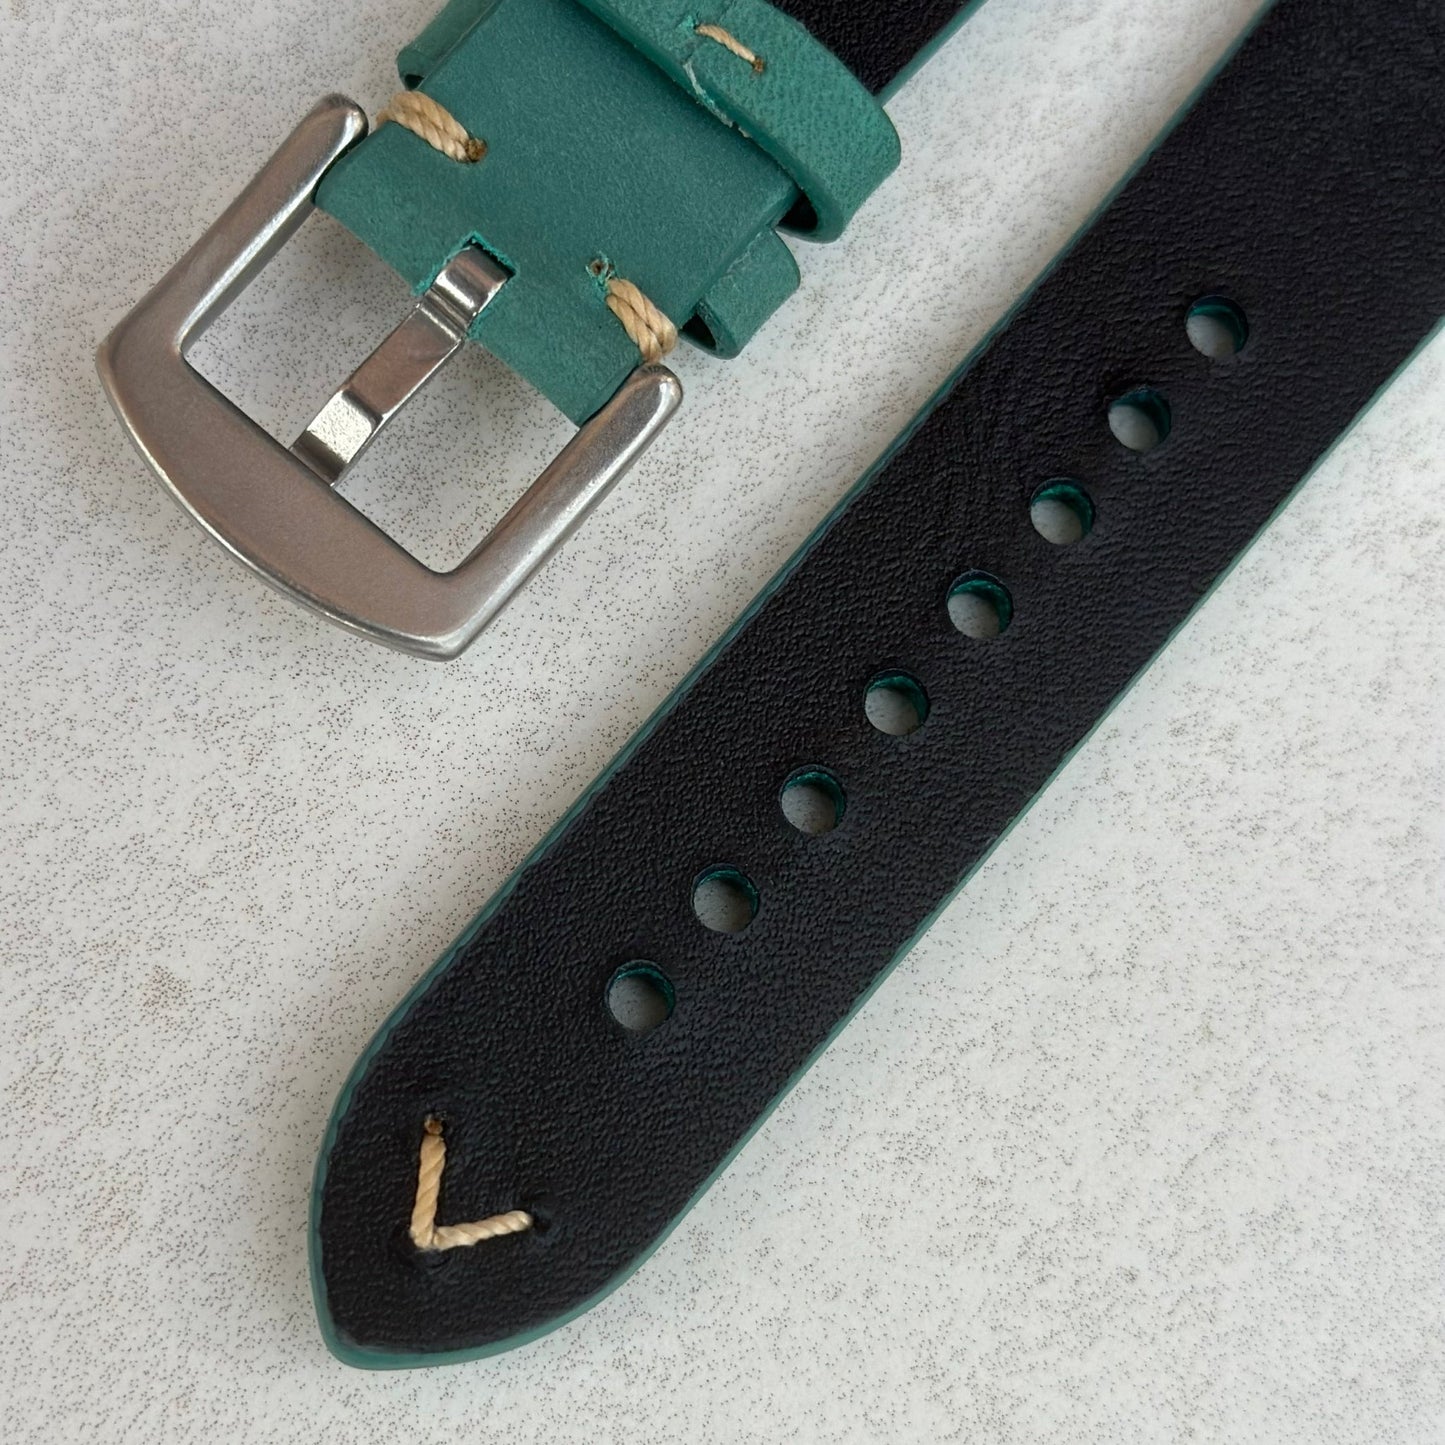 Underside of the buckle on the Madrid Caribbean blue Apple Watch strap. Watch And Strap.